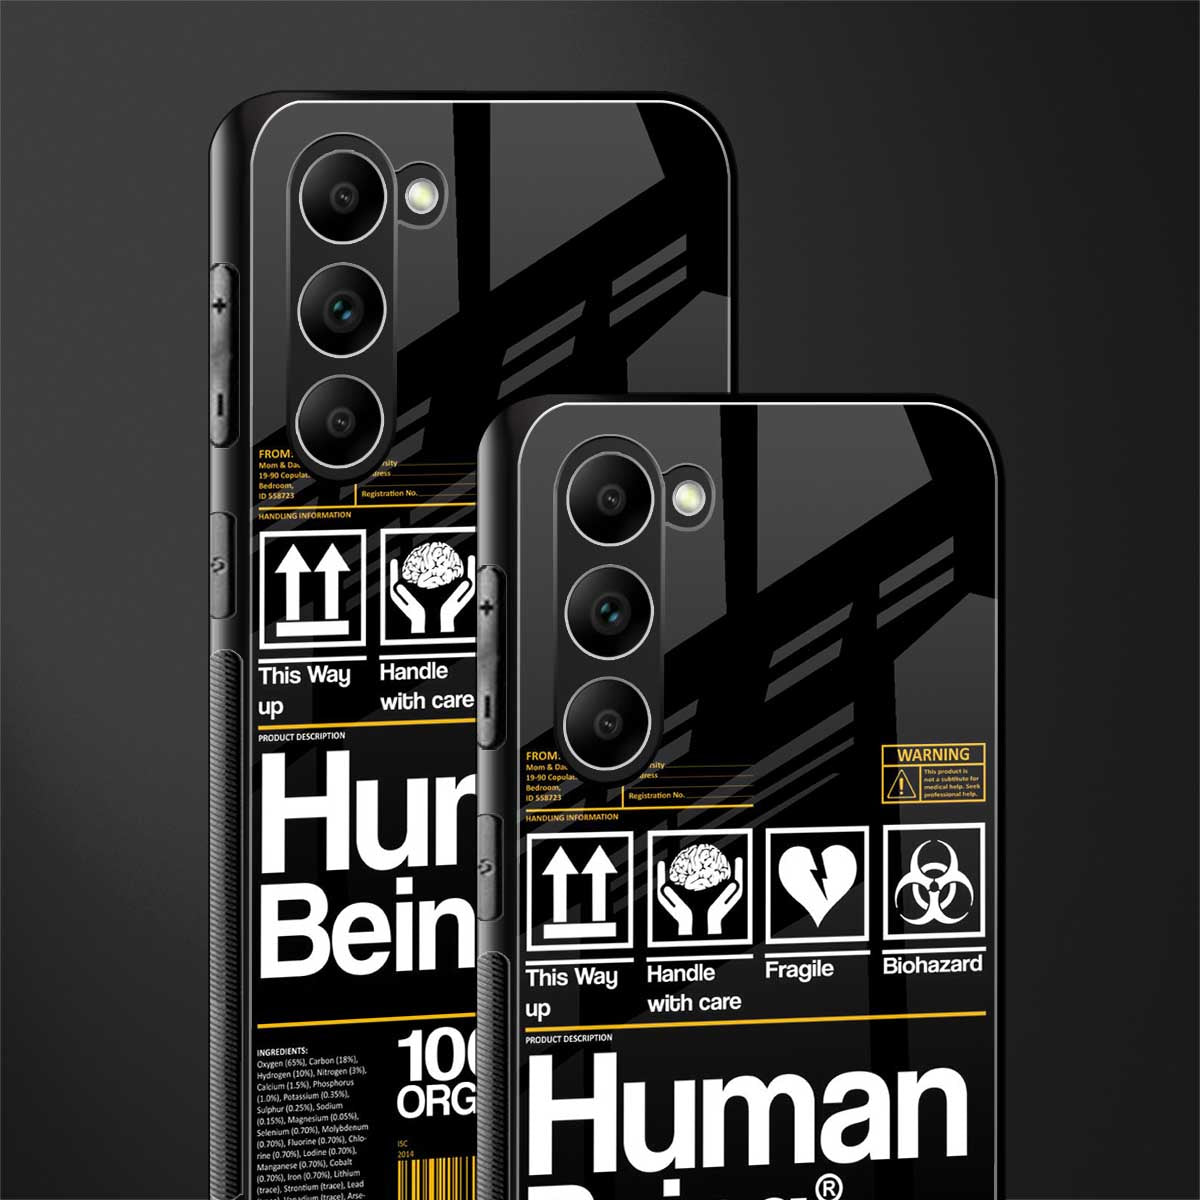 human being label glass case for phone case | glass case for samsung galaxy s23